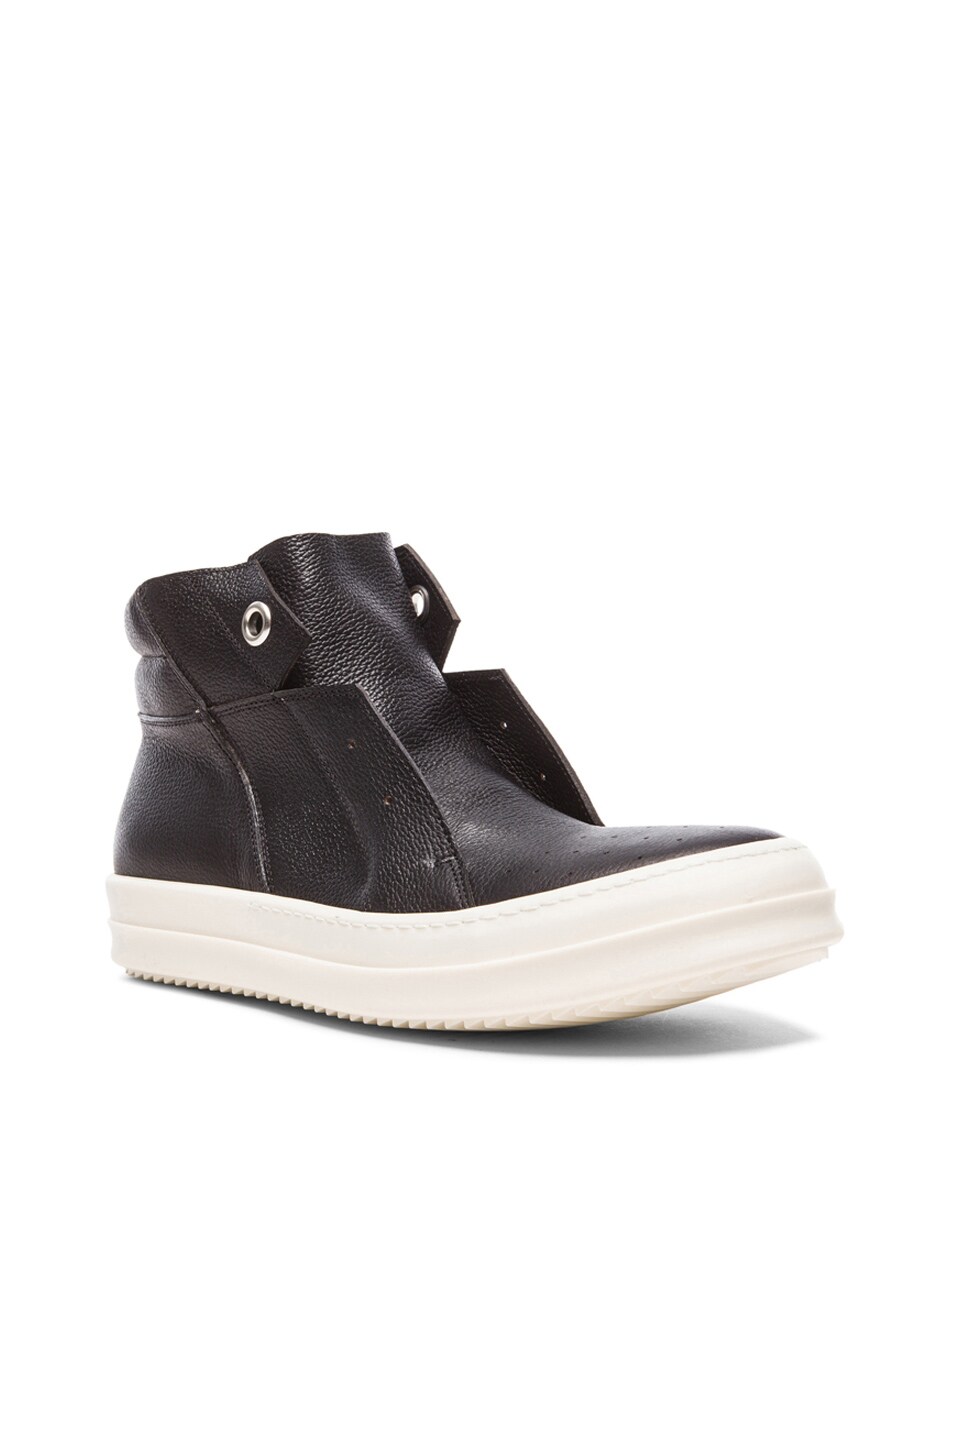 Image 1 of Rick Owens Island Dunk Leather Sneakers in Black & White